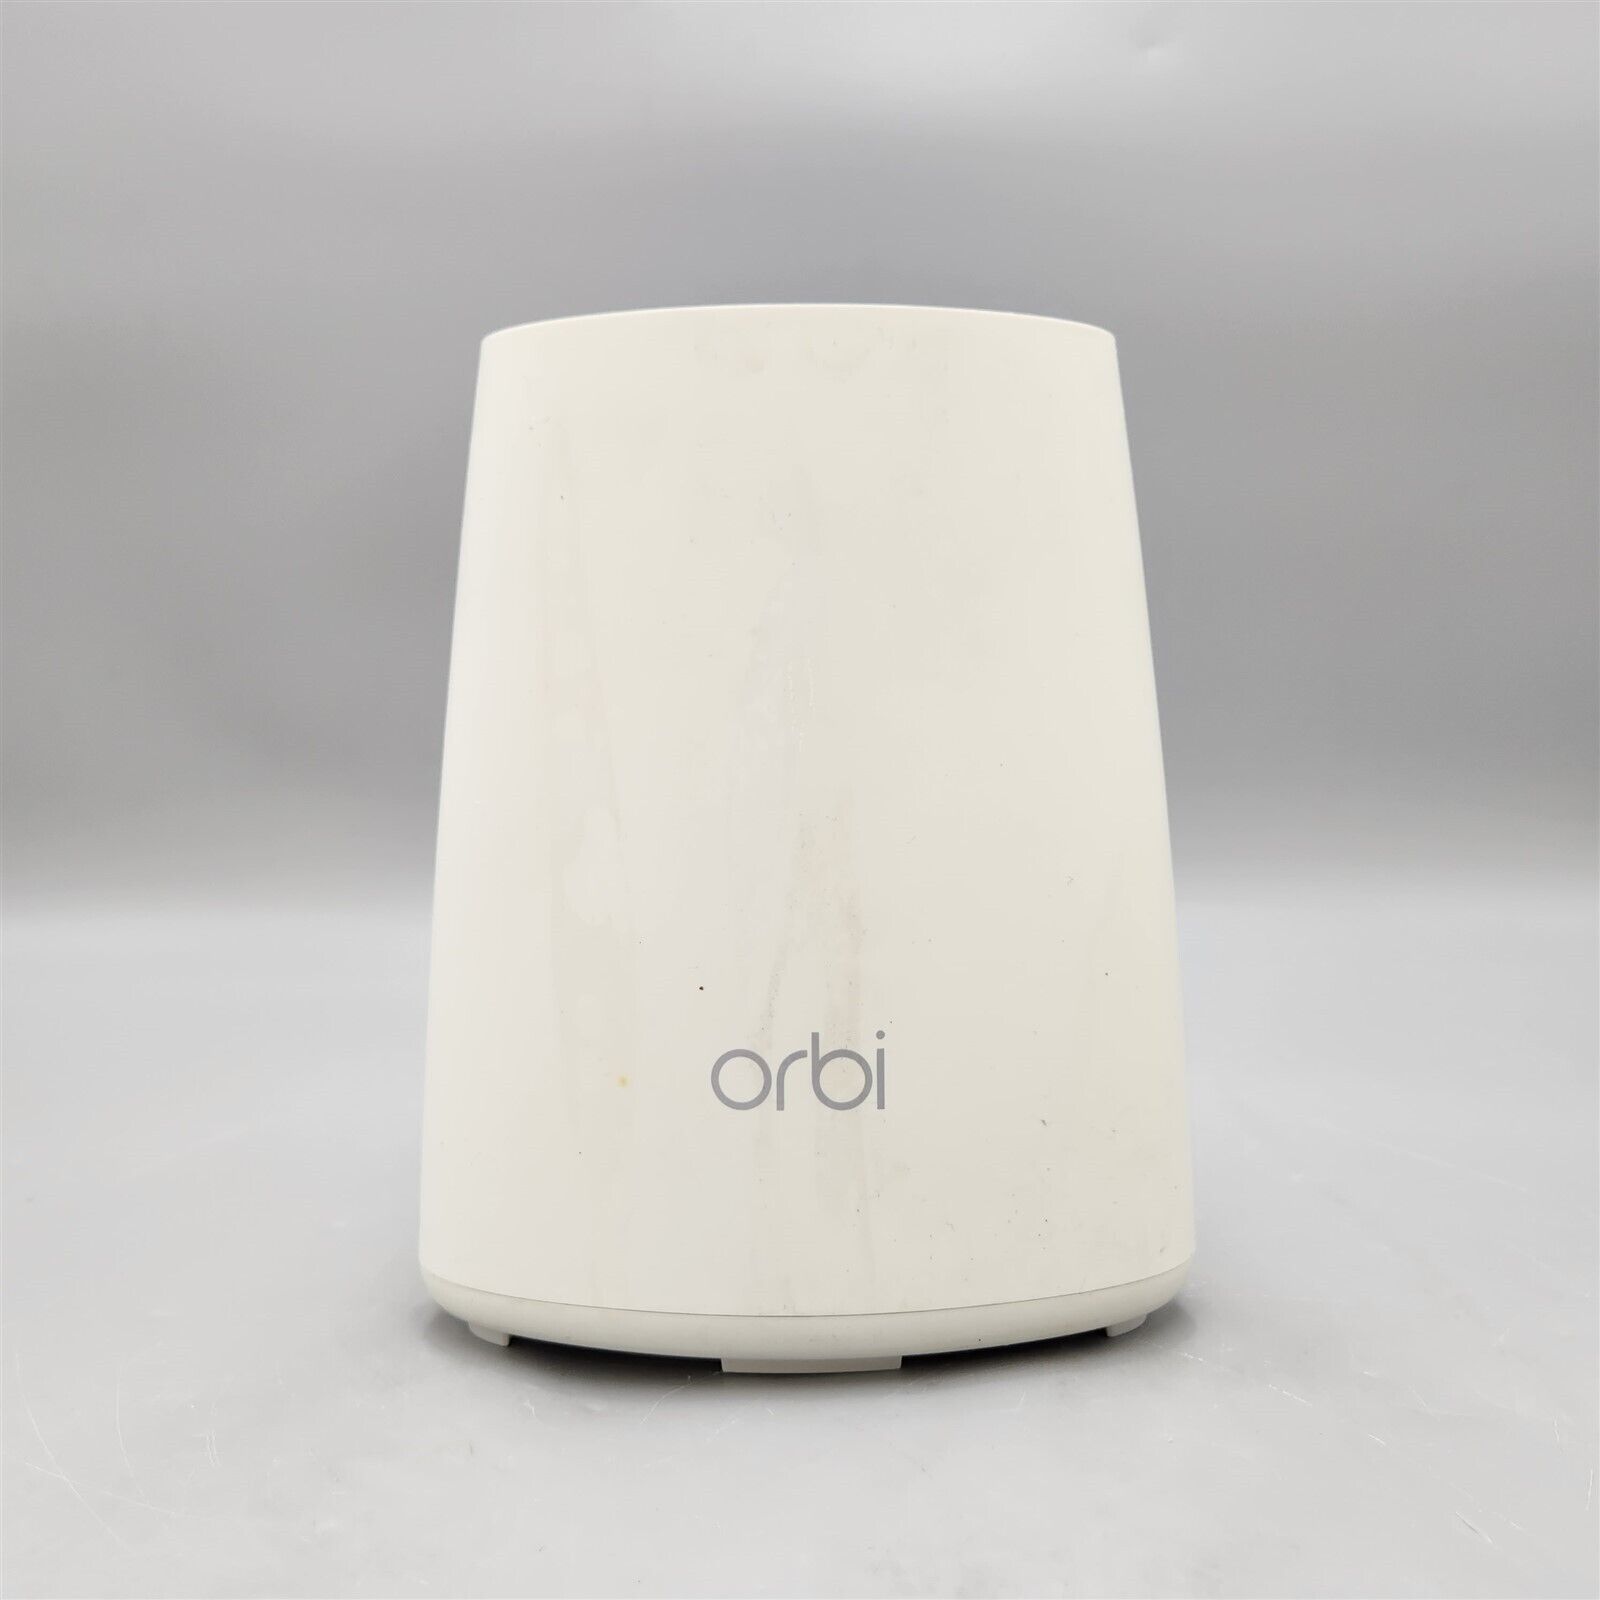 Replacement Genuine Router for NETGEAR Orbi Home WiFi System AC3000 - RBK50